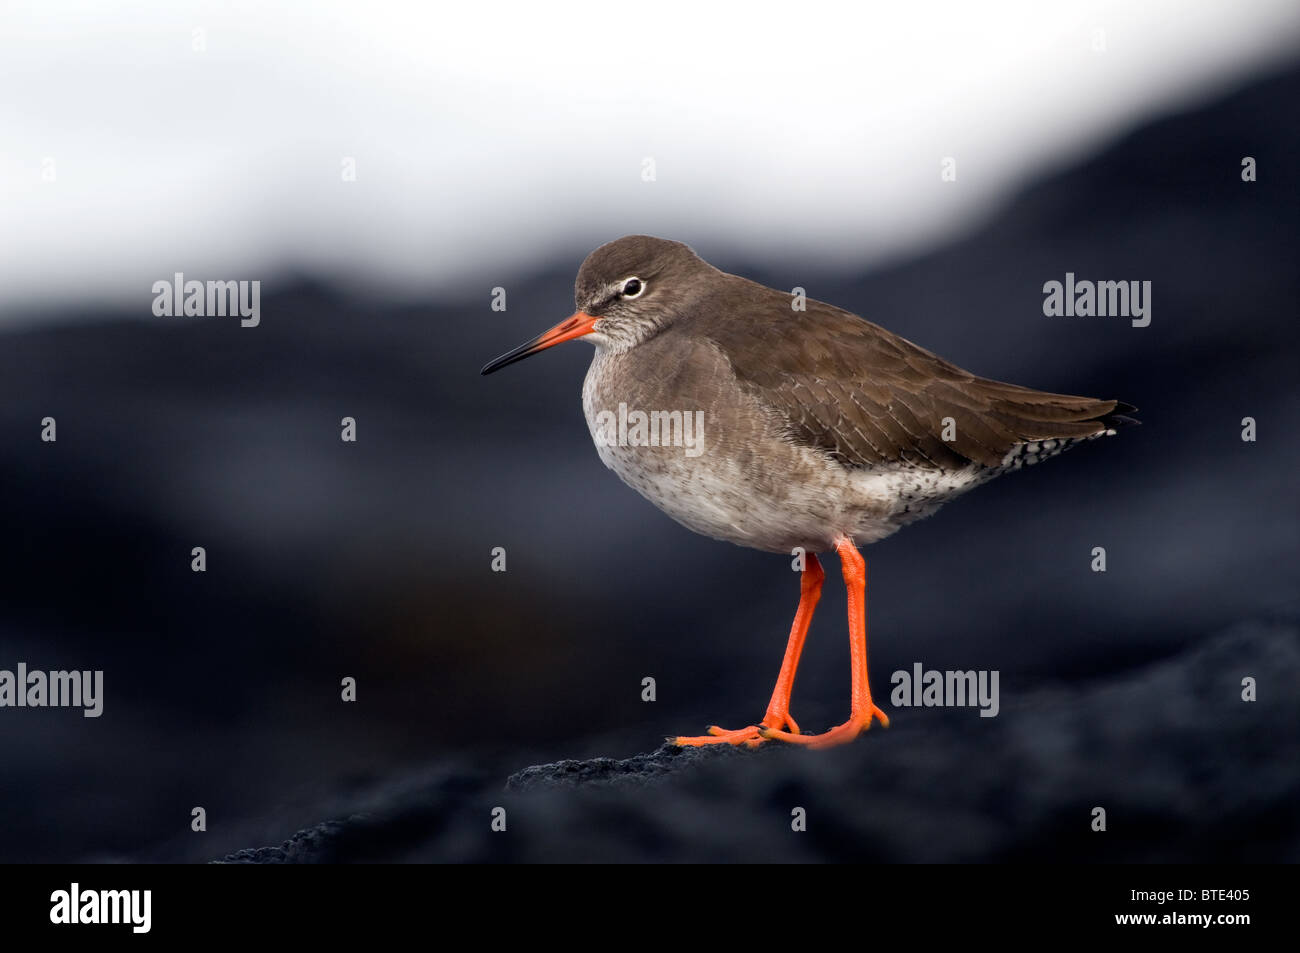 Common Redshank in a rock standing for portrait Stock Photo